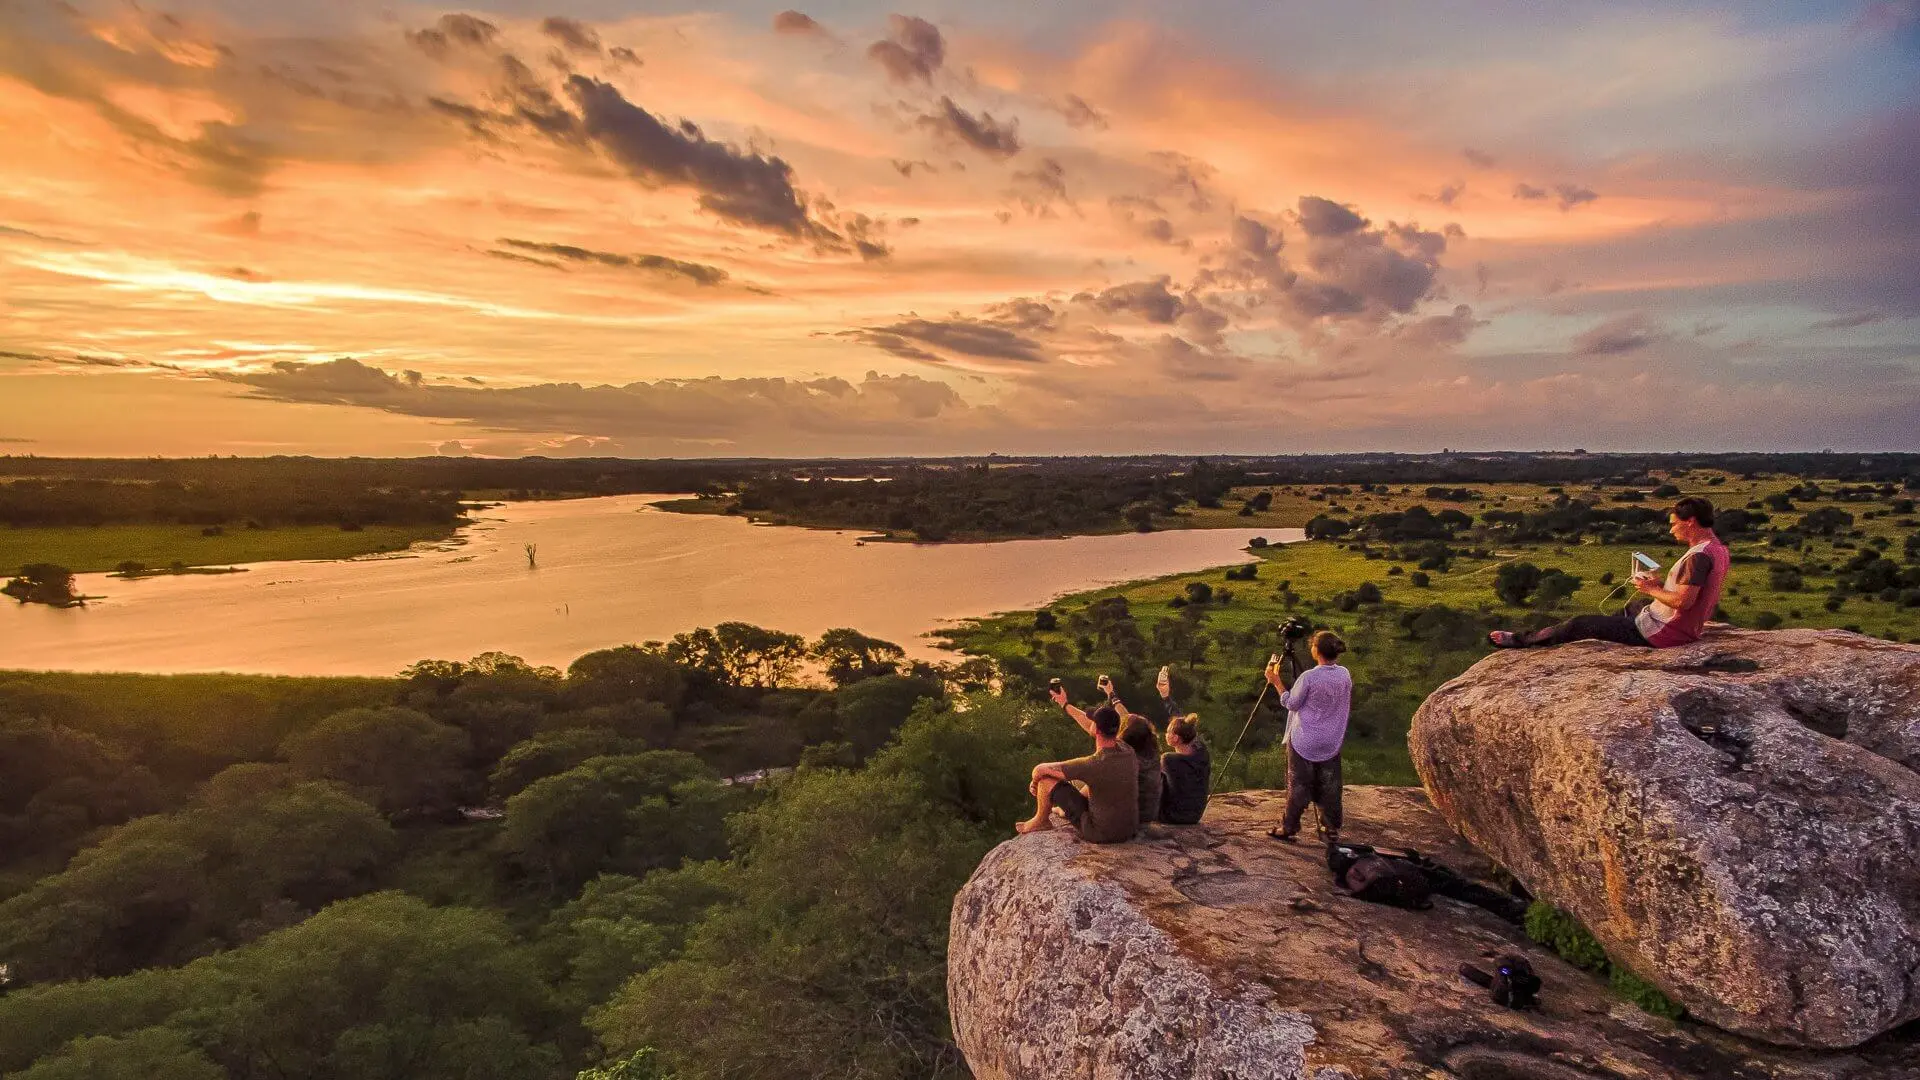 During sundown, a group of volunteers are enjoying the view of Zimbabwe.